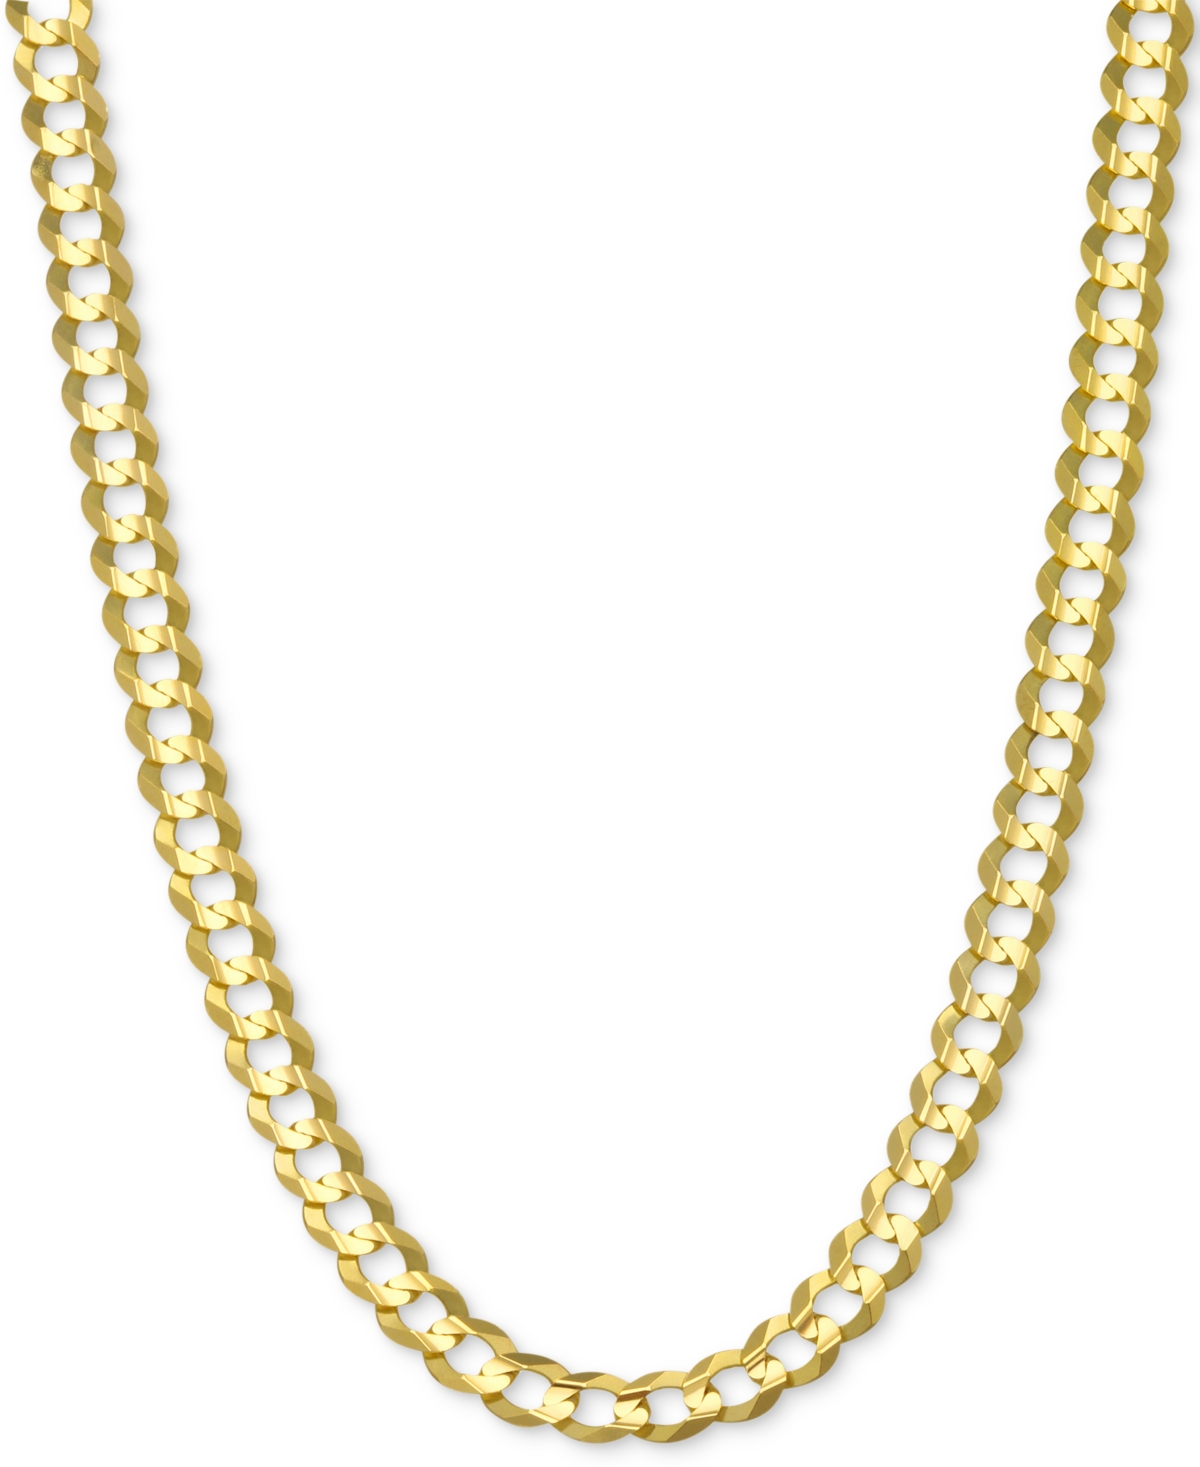 26" Open Curb Link Chain Necklace in Solid 14k Gold - Gold